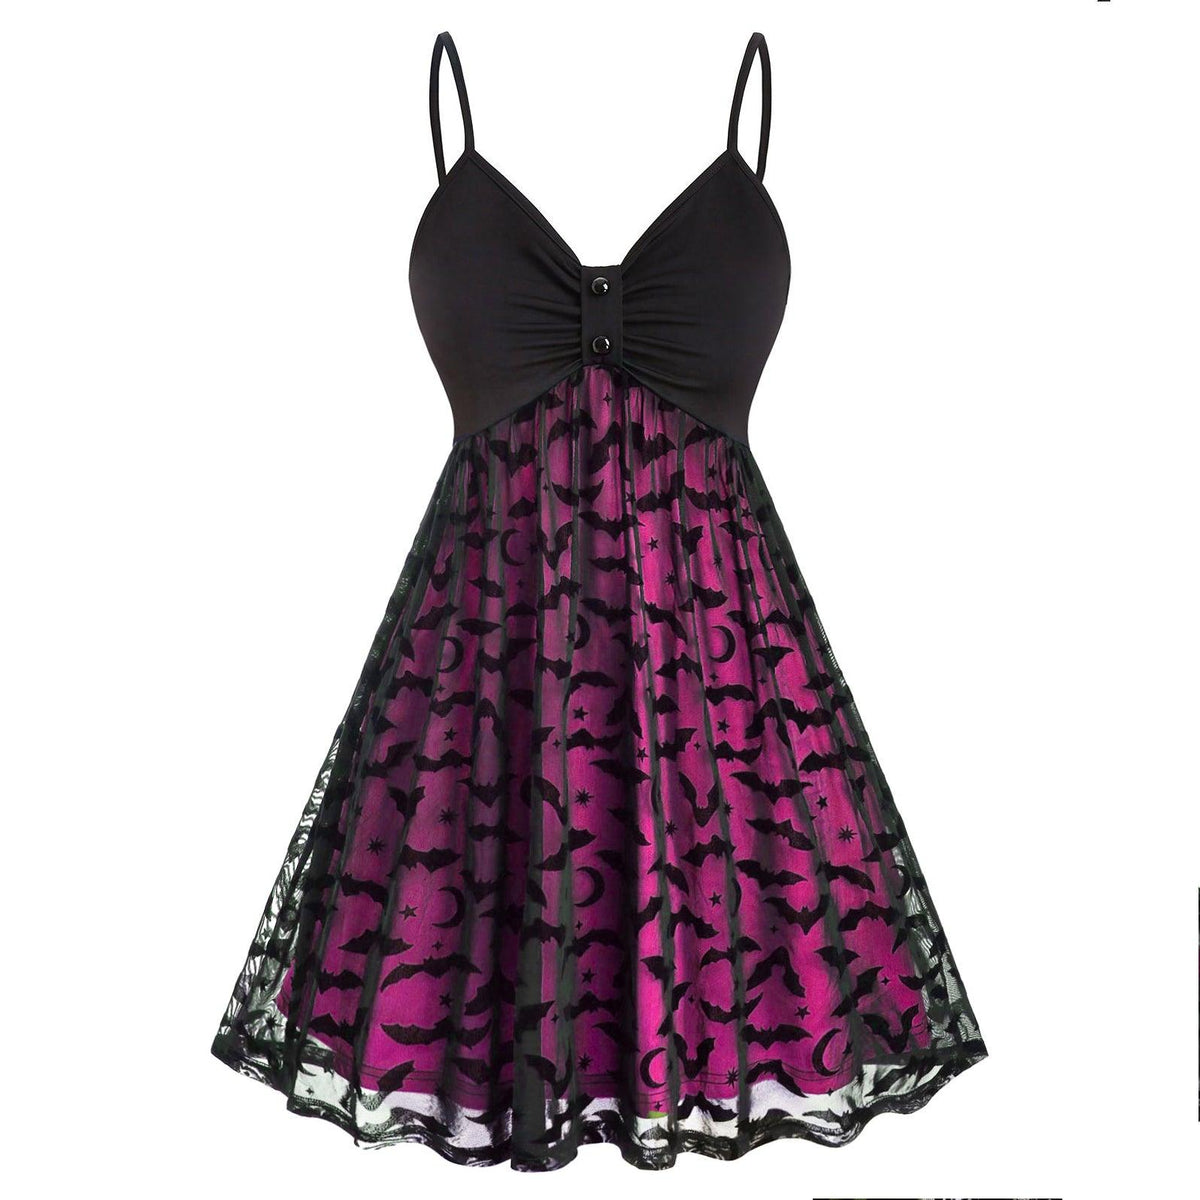 Gothic Bat Mesh Pink Neon Double Layer Dress, Sexy Strap A-Line Party Vestidos For Women - Wonder Skull